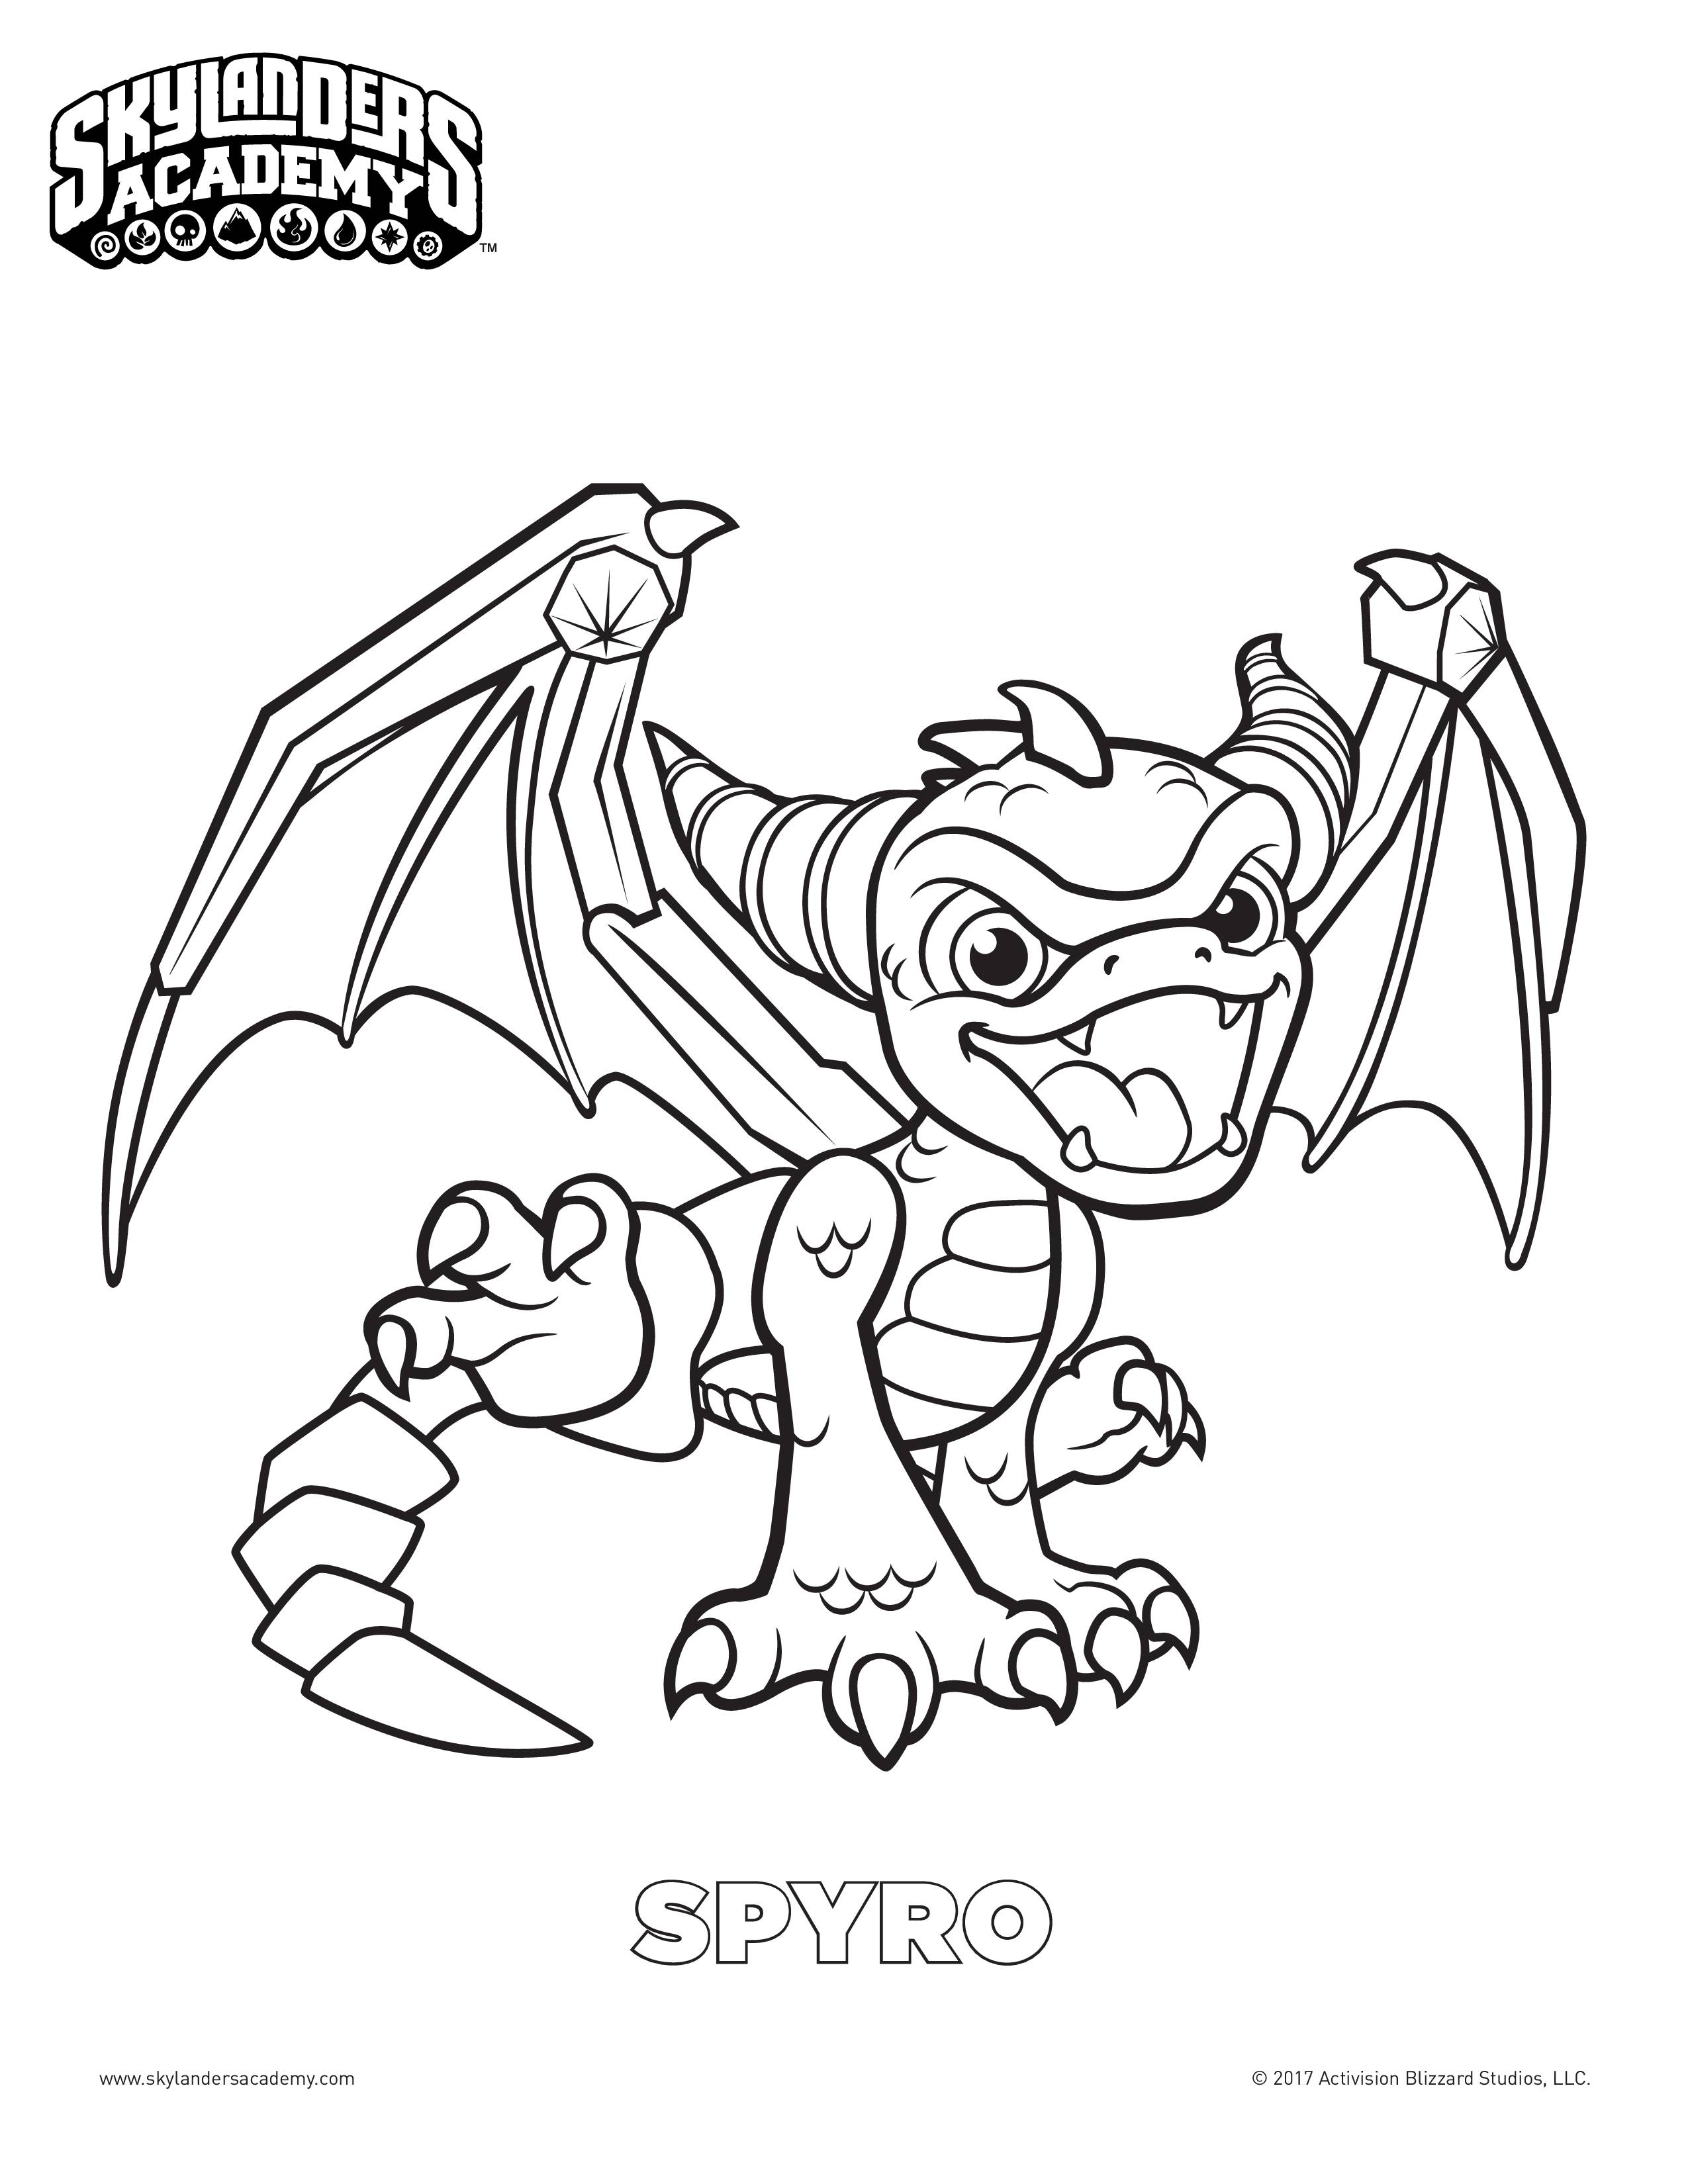 dark spyro the dragon coloring pages - photo #11